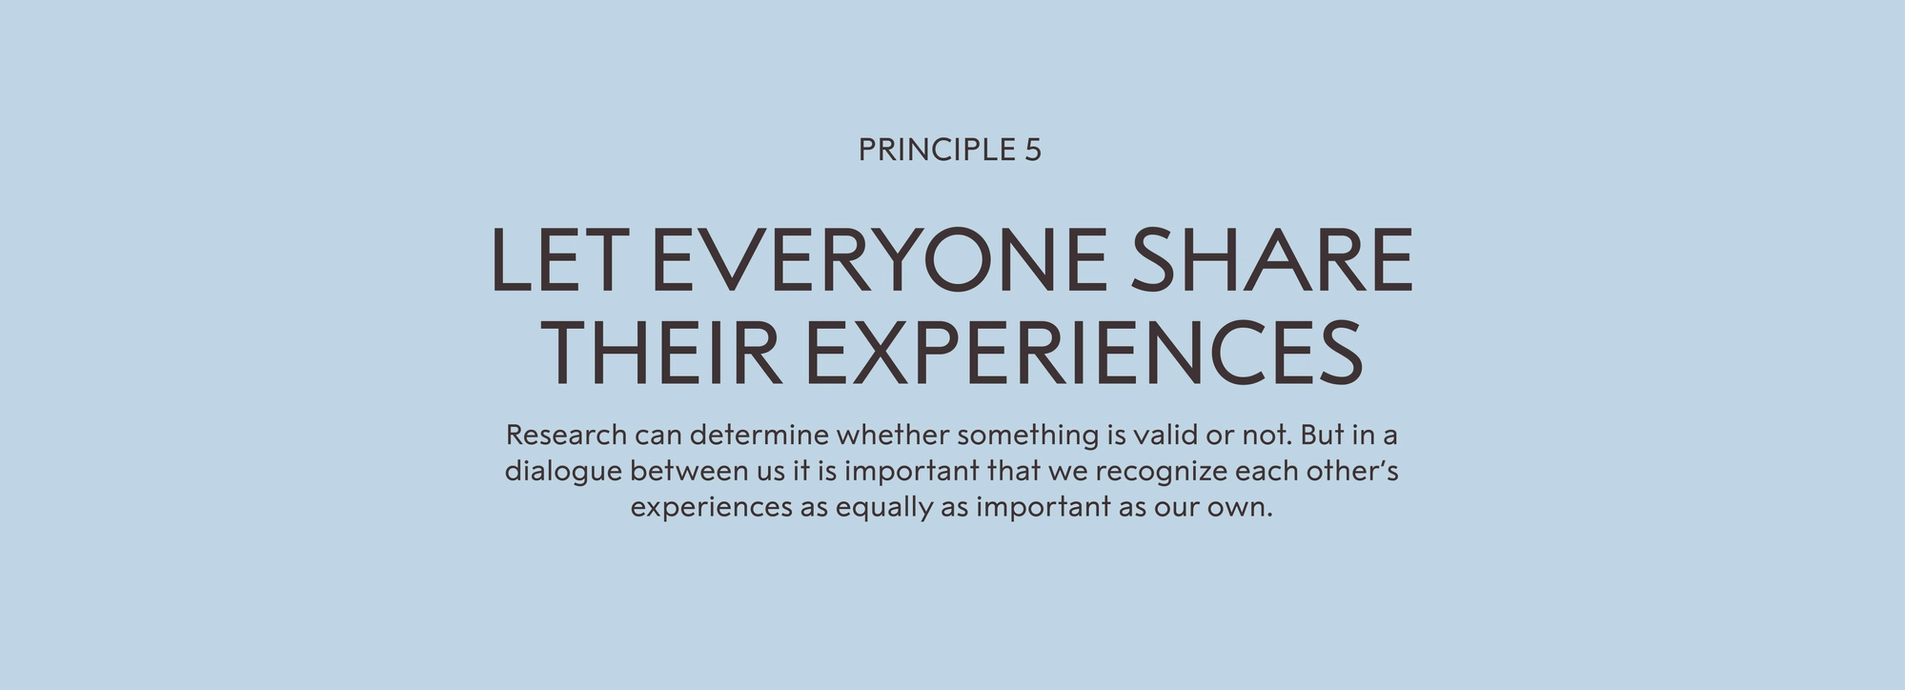 Principle 5: let everyone share their experiences